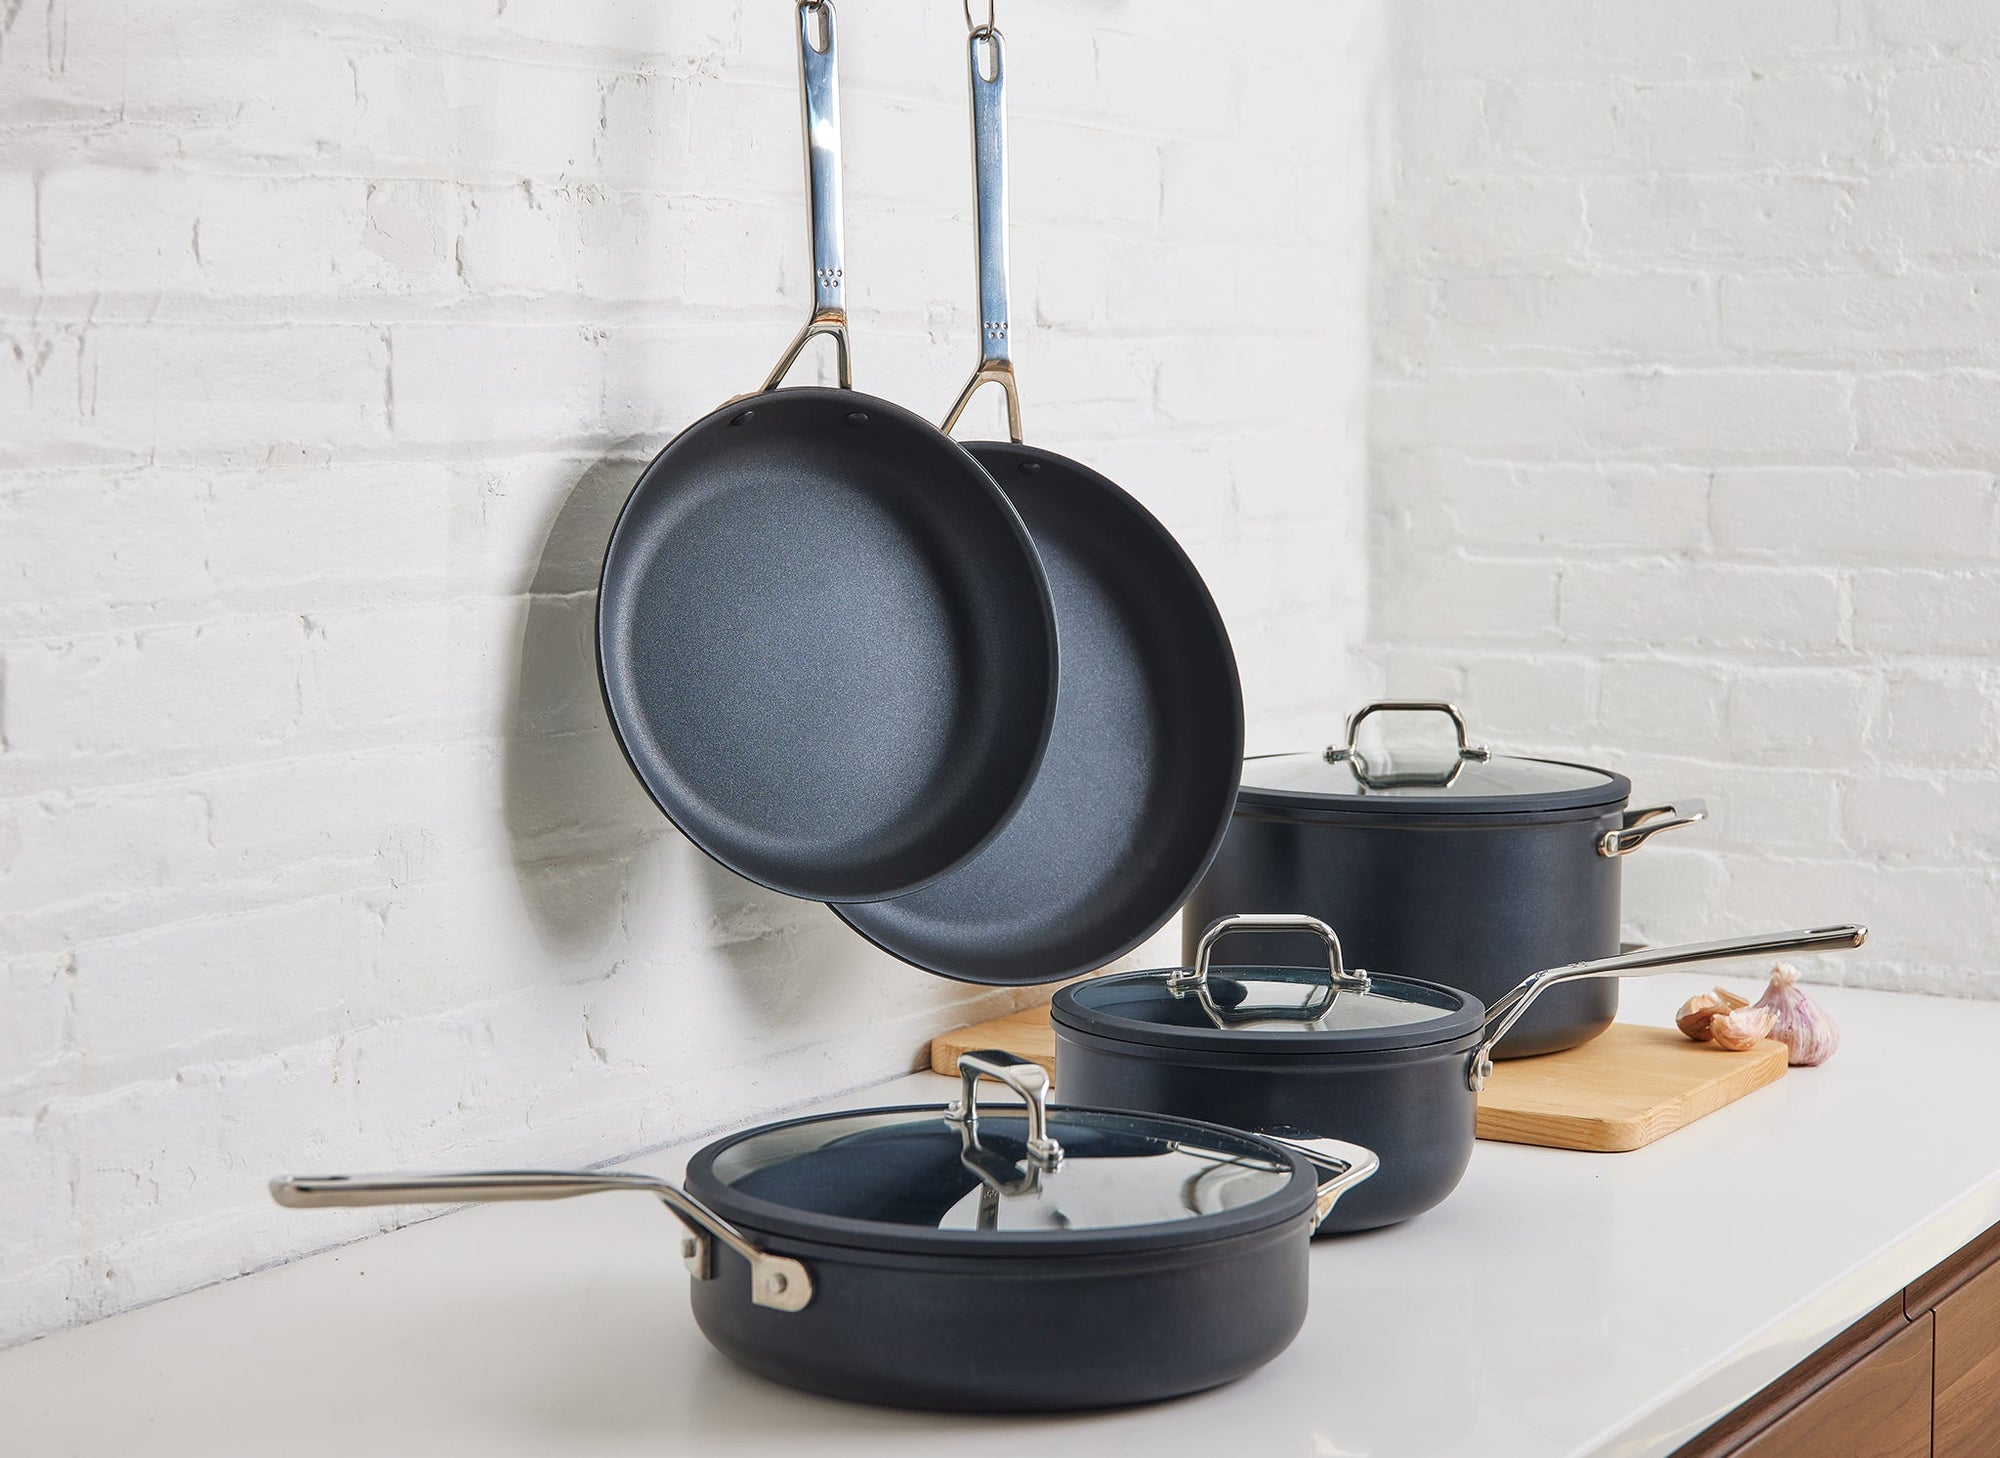 The Misen 9-Piece Essentials Cookware Set on kitchen counter, with most pieces visible: the 10- and 12-inch Nonstick Pans hanging from hooks, the Nonstick Stock Pot, Nonstick Sauté, and Nonstick Saucier, with lids.